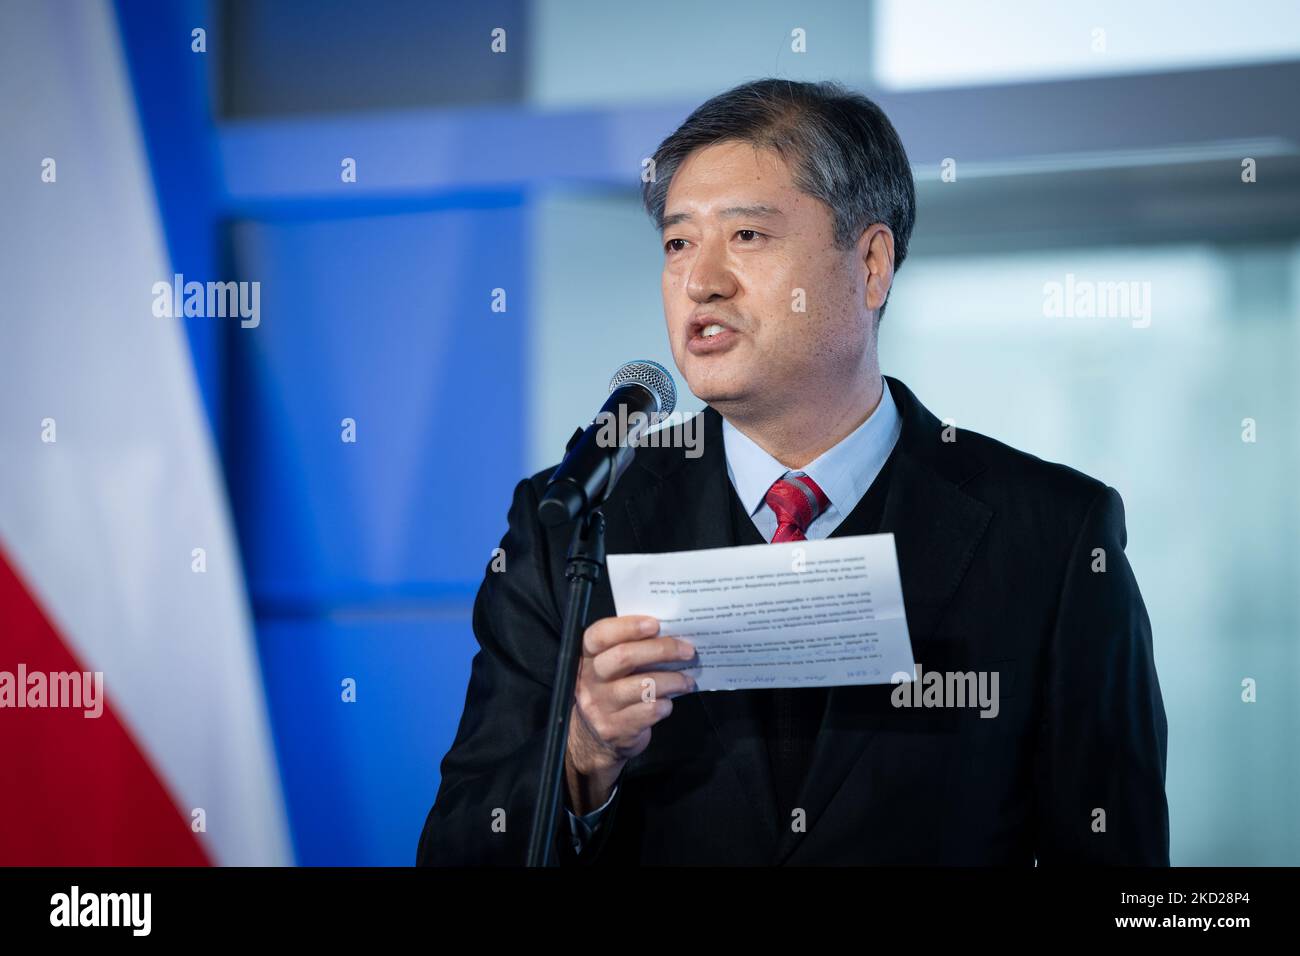 Seong Soo (???) Kang (Incheon International Airport Corporation) during the press conference on air traffic forecasts for Poland and the new Central Polish Airport (Solidarity Transport Hub) prepared by the IATA, at Chopin Airport in Warsaw, Poland, on 8 February 2022 (Photo by Mateusz Wlodarczyk/NurPhoto) Stock Photo